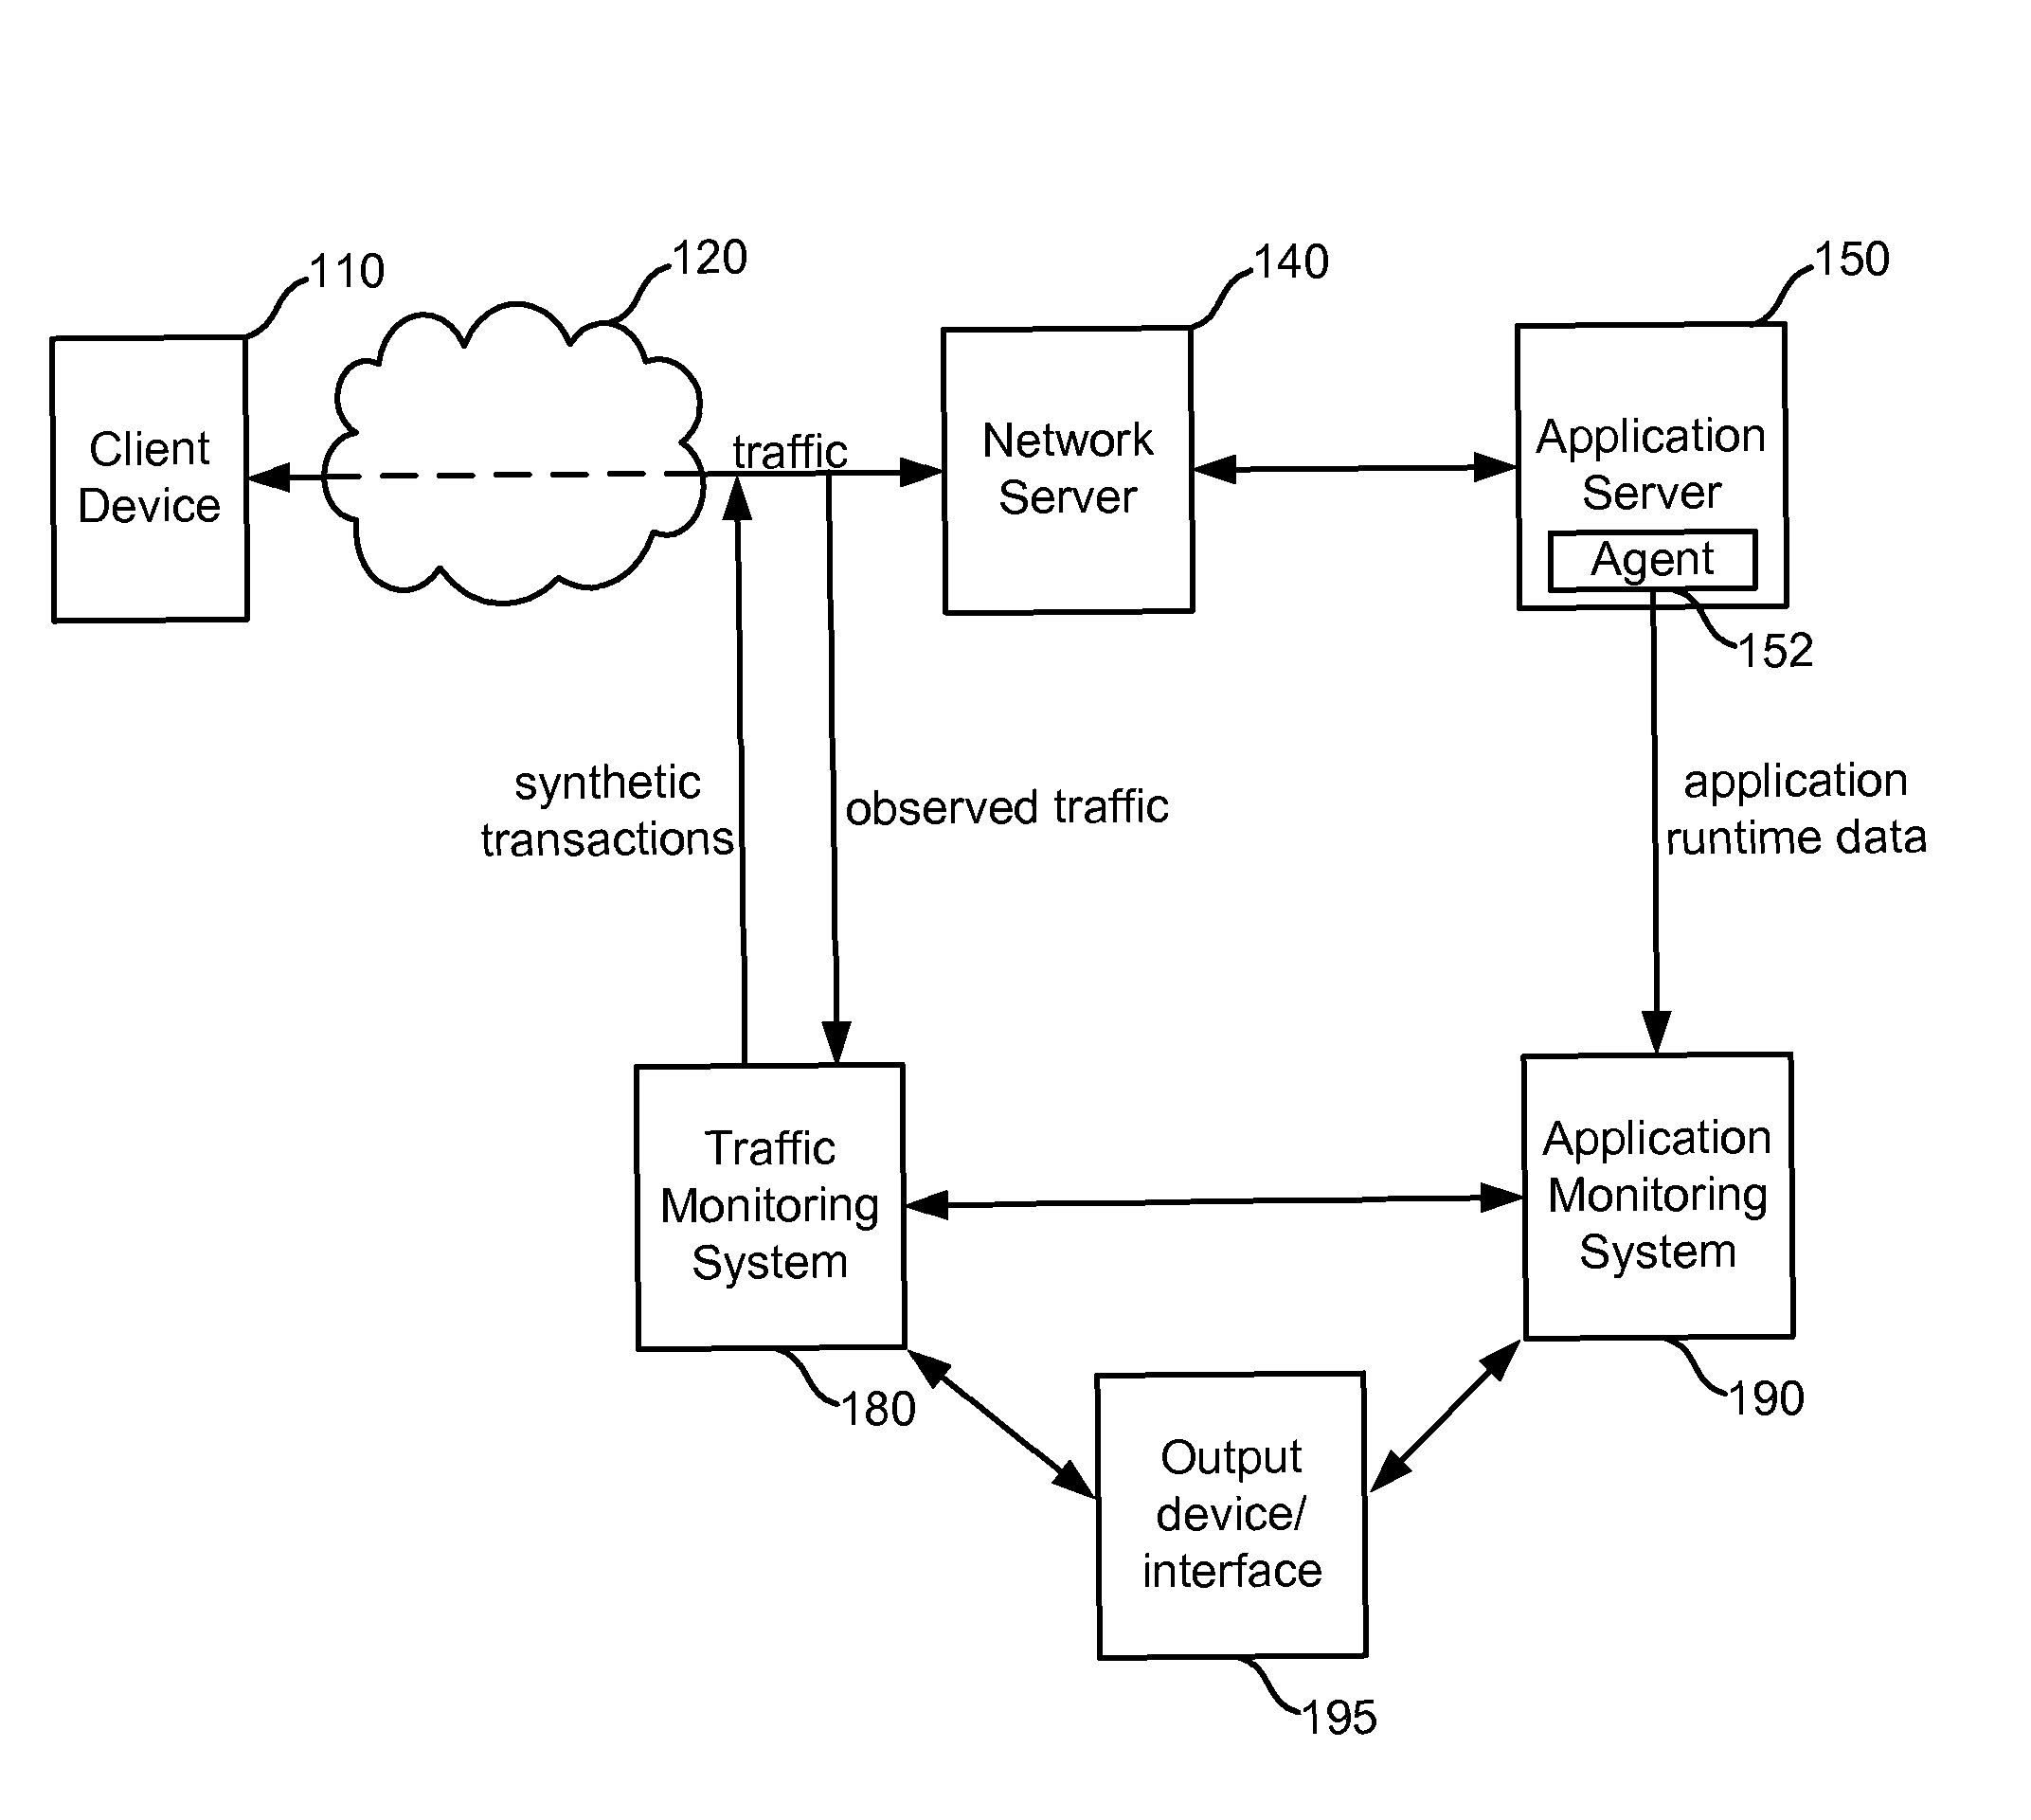 Hierarchy for characterizing interactions with an application